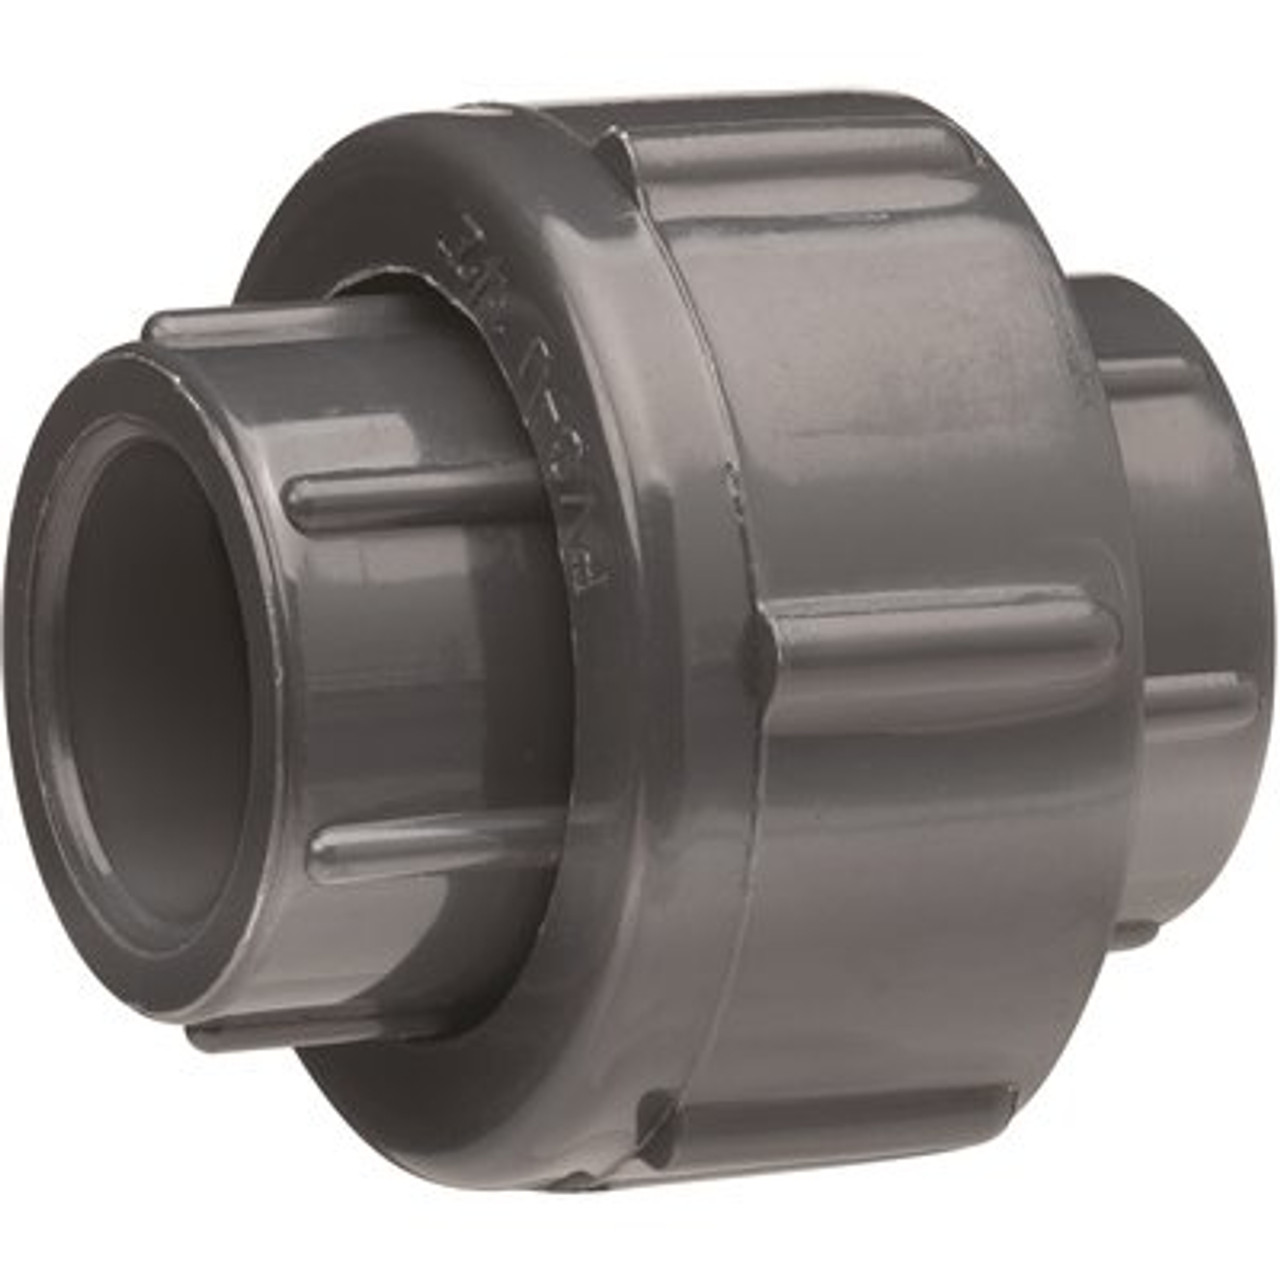 HOMEWERKS 1 in. Solvent x 1 in. Solvent PVC Union